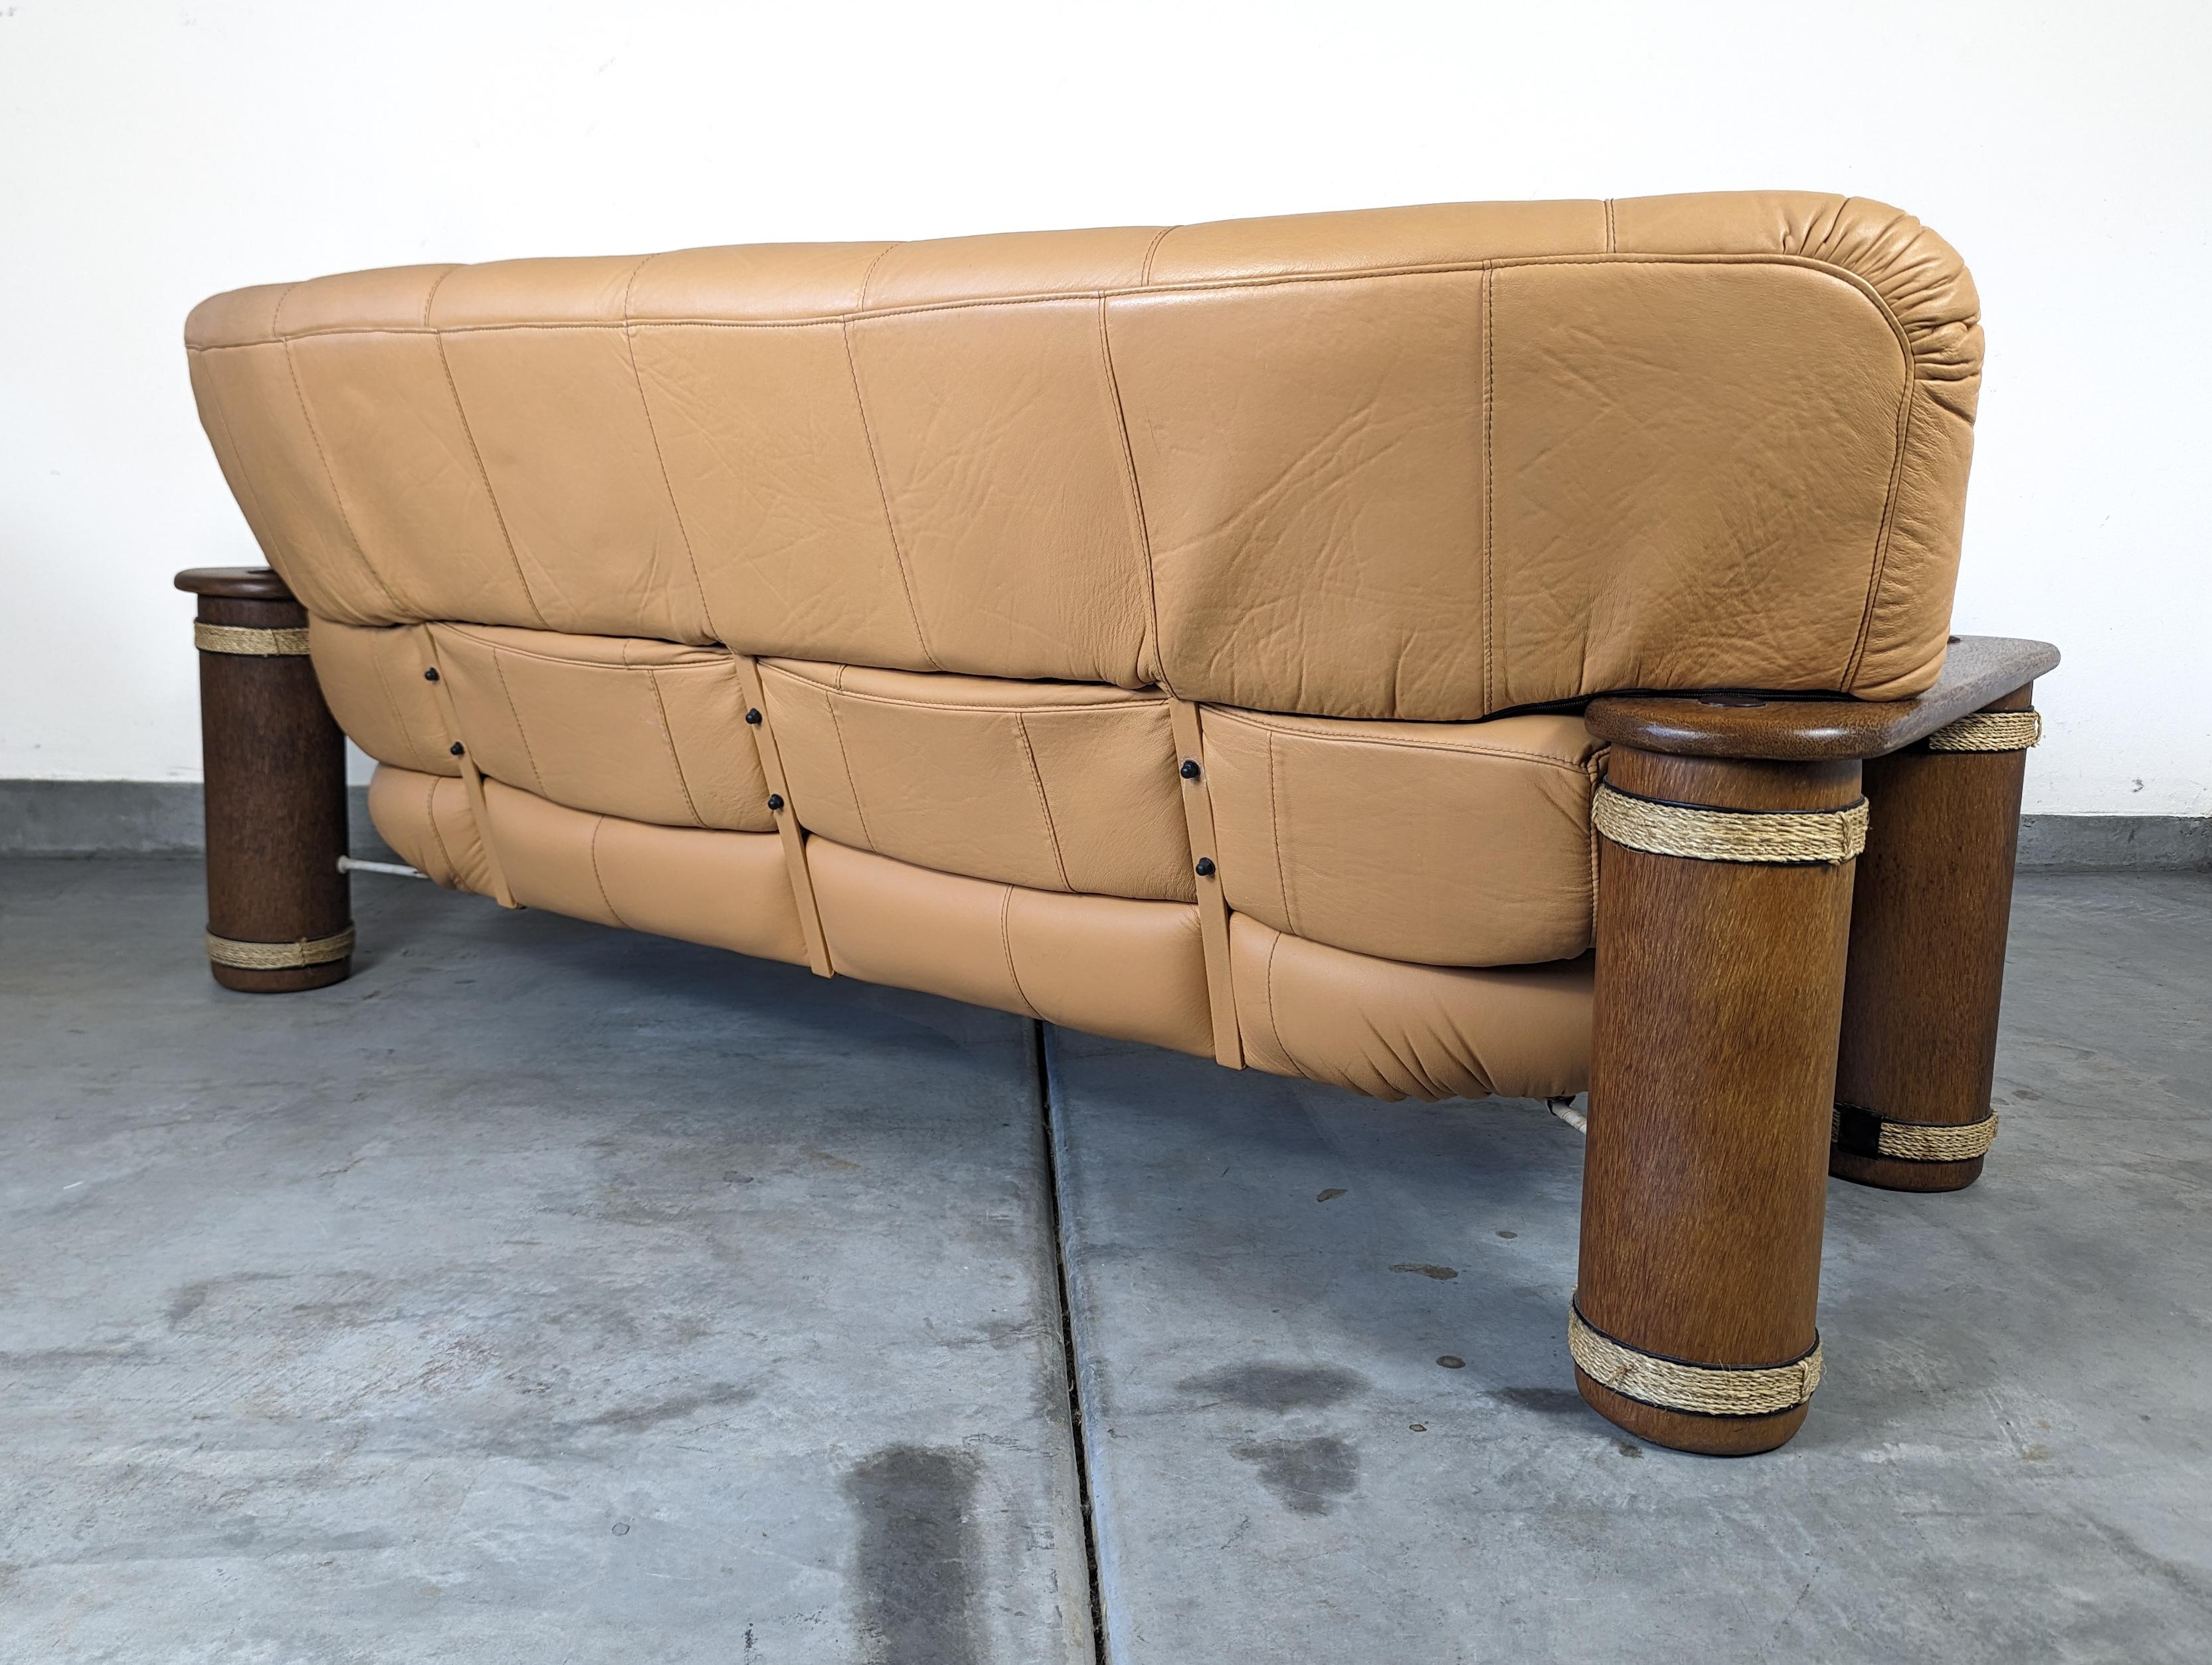 Vintage Leather and Palmwood Three-Seat Sofa by Pacific Green, c1990s For Sale 1